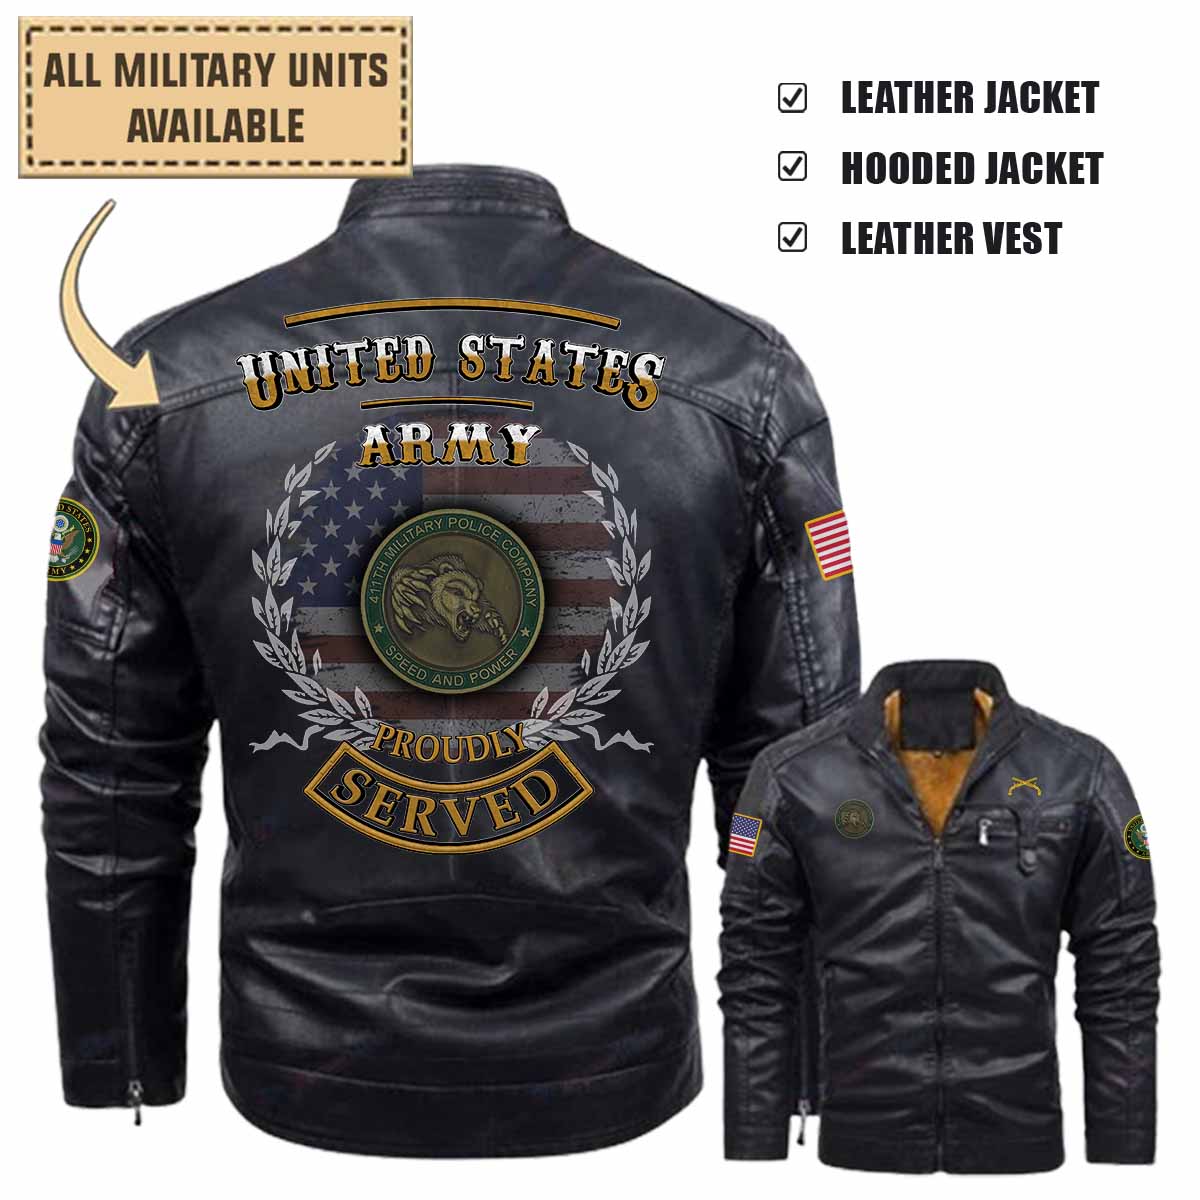 411th MP CO 411th Military Police Company_Military Leather Jacket and Vest